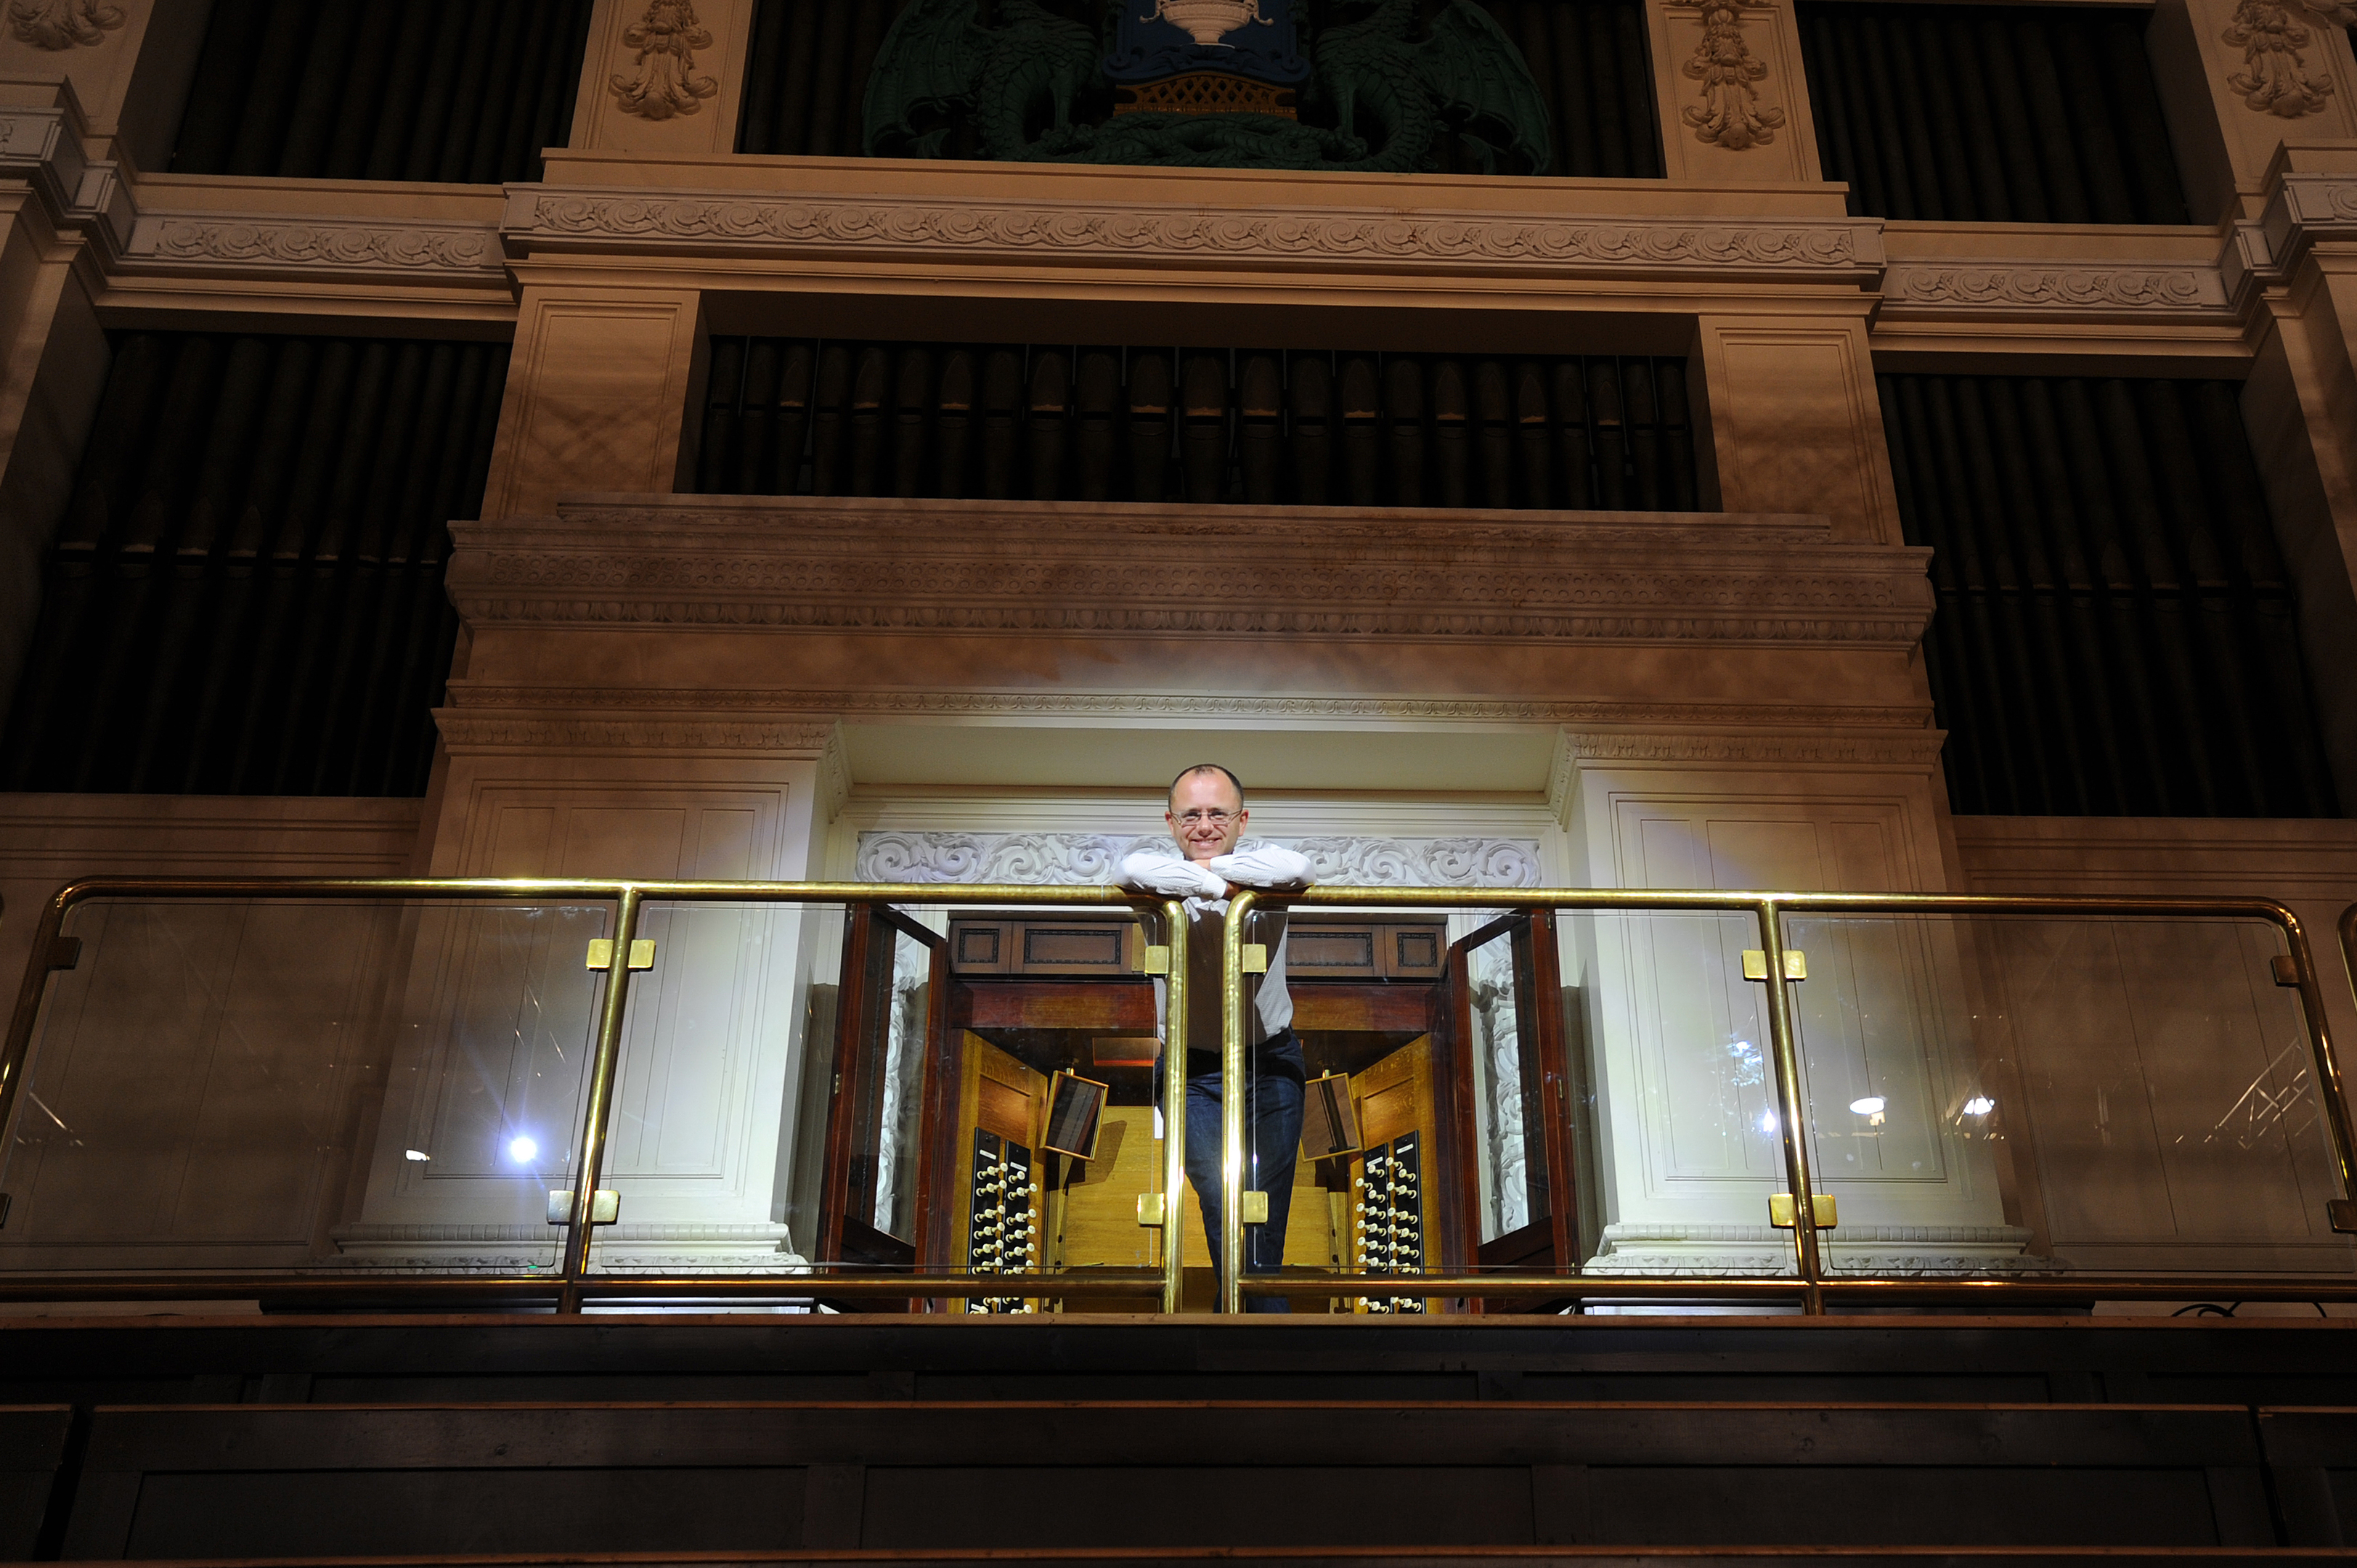 Dundee City organist Stuart Muir in front of the Caird Hall organ.